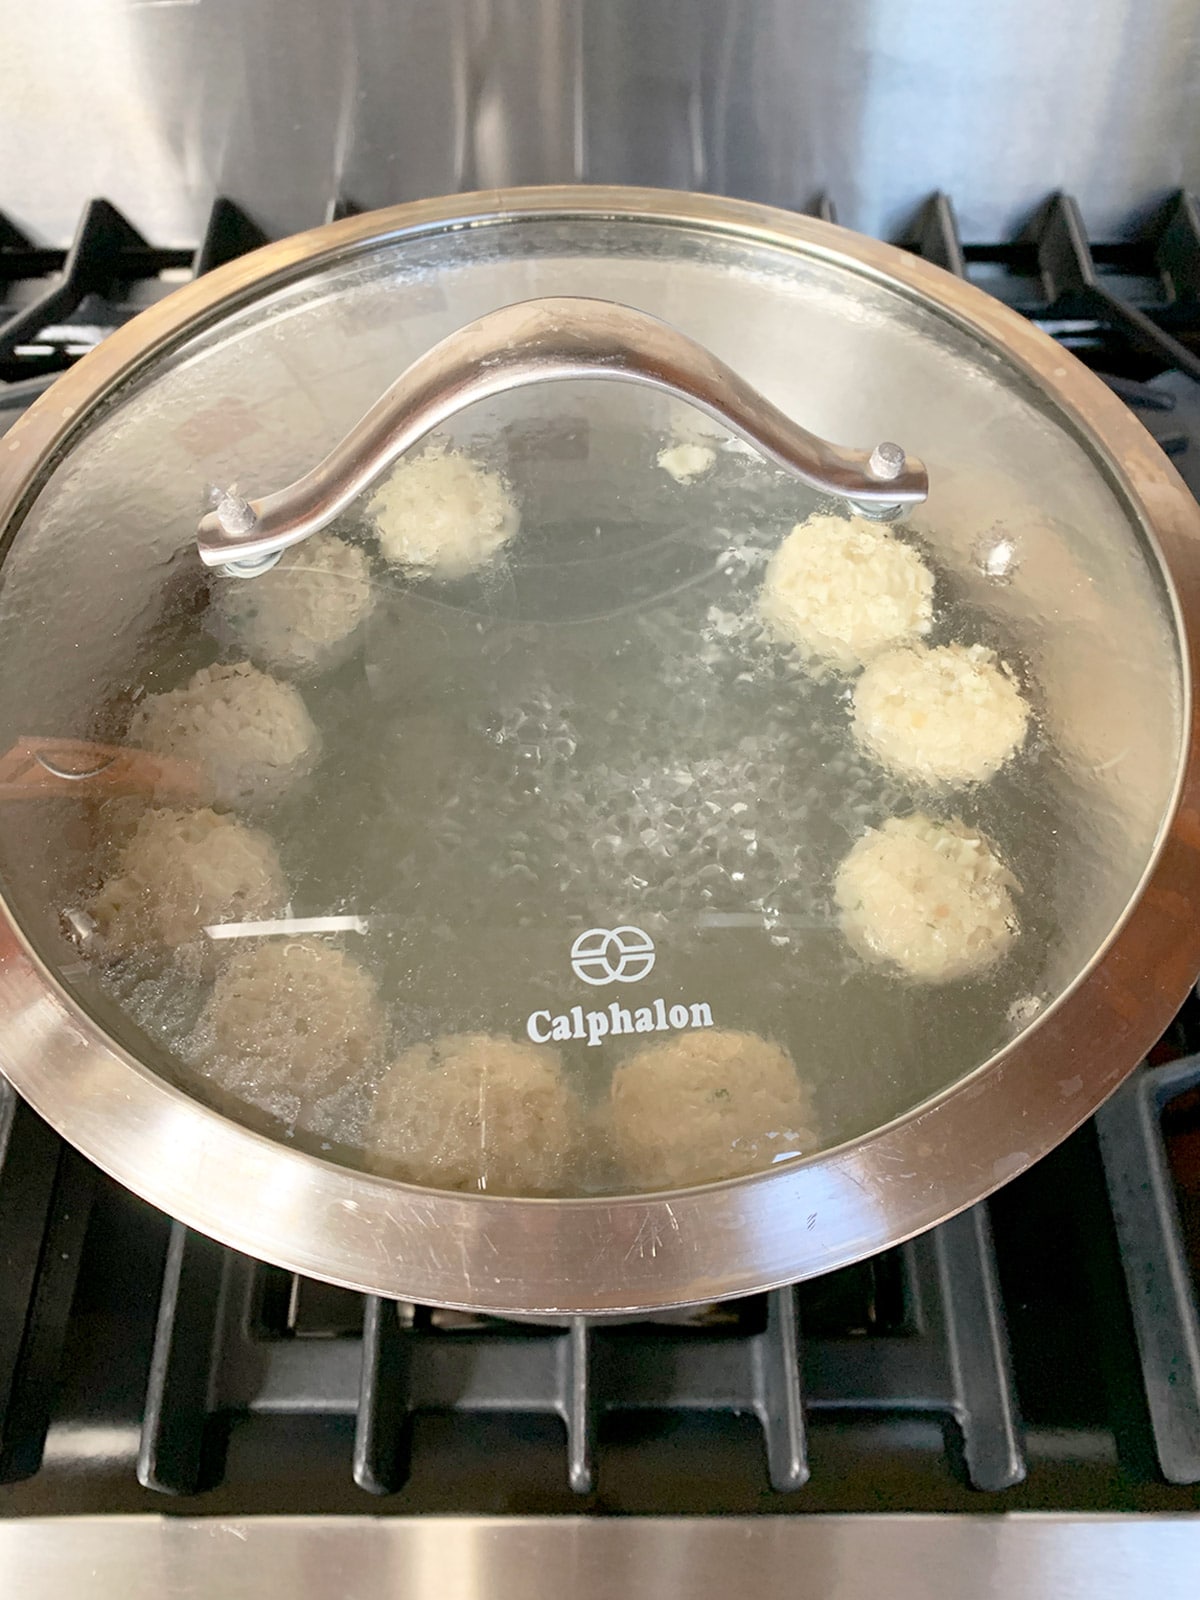 Matzo balls in pot after rising to the top.